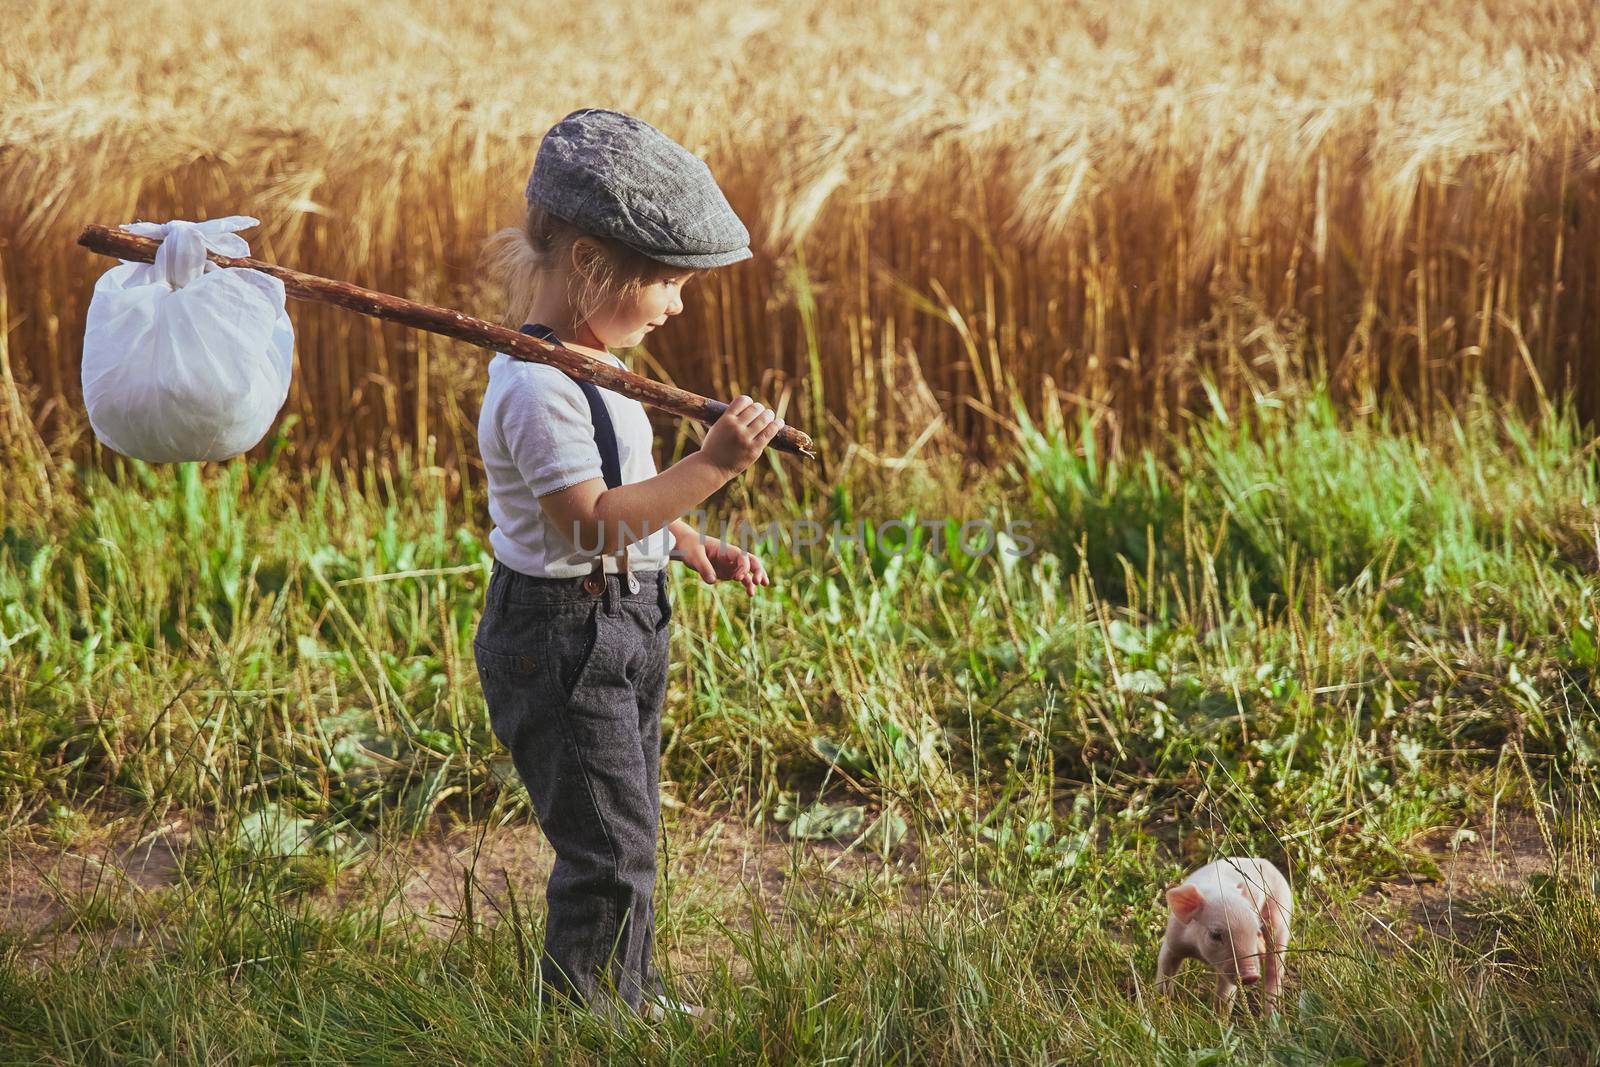 The little traveler met a piglet in the field. Retro photo.